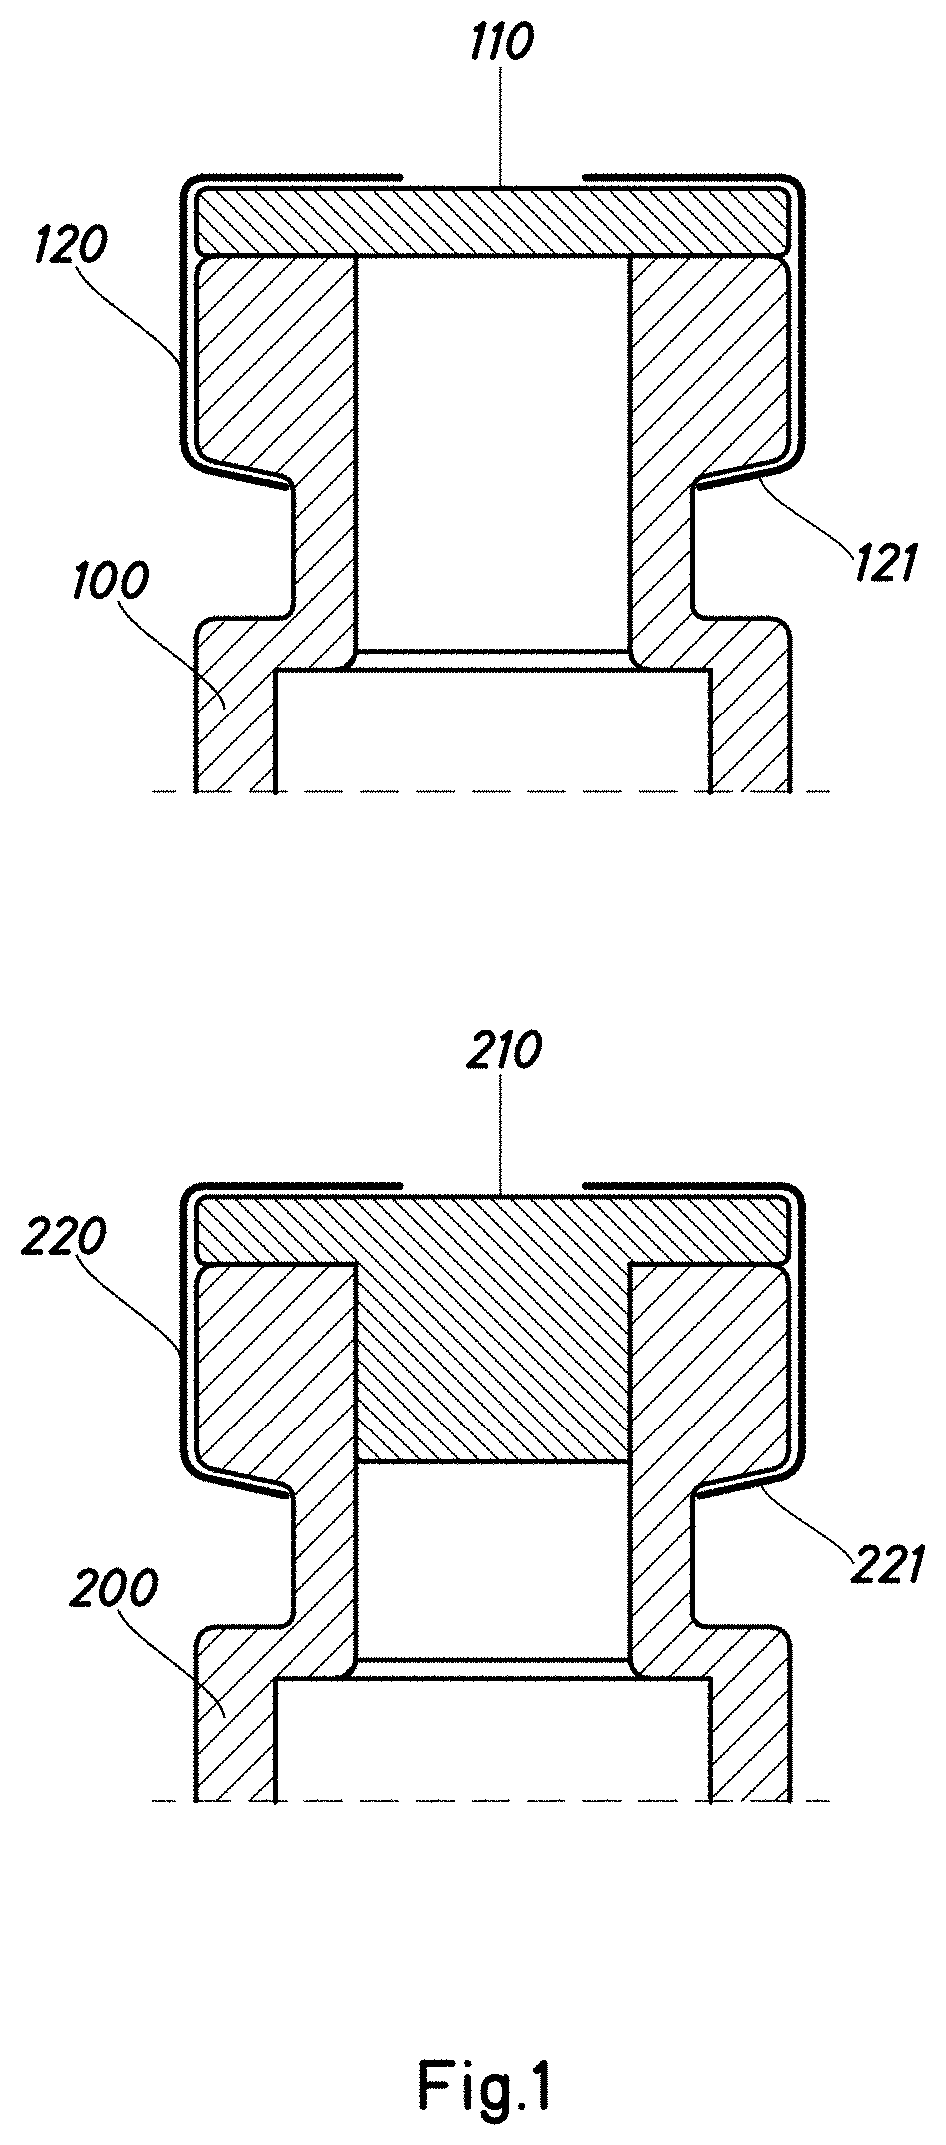 Method and device for detecting defects in the closure of encapsulated vials